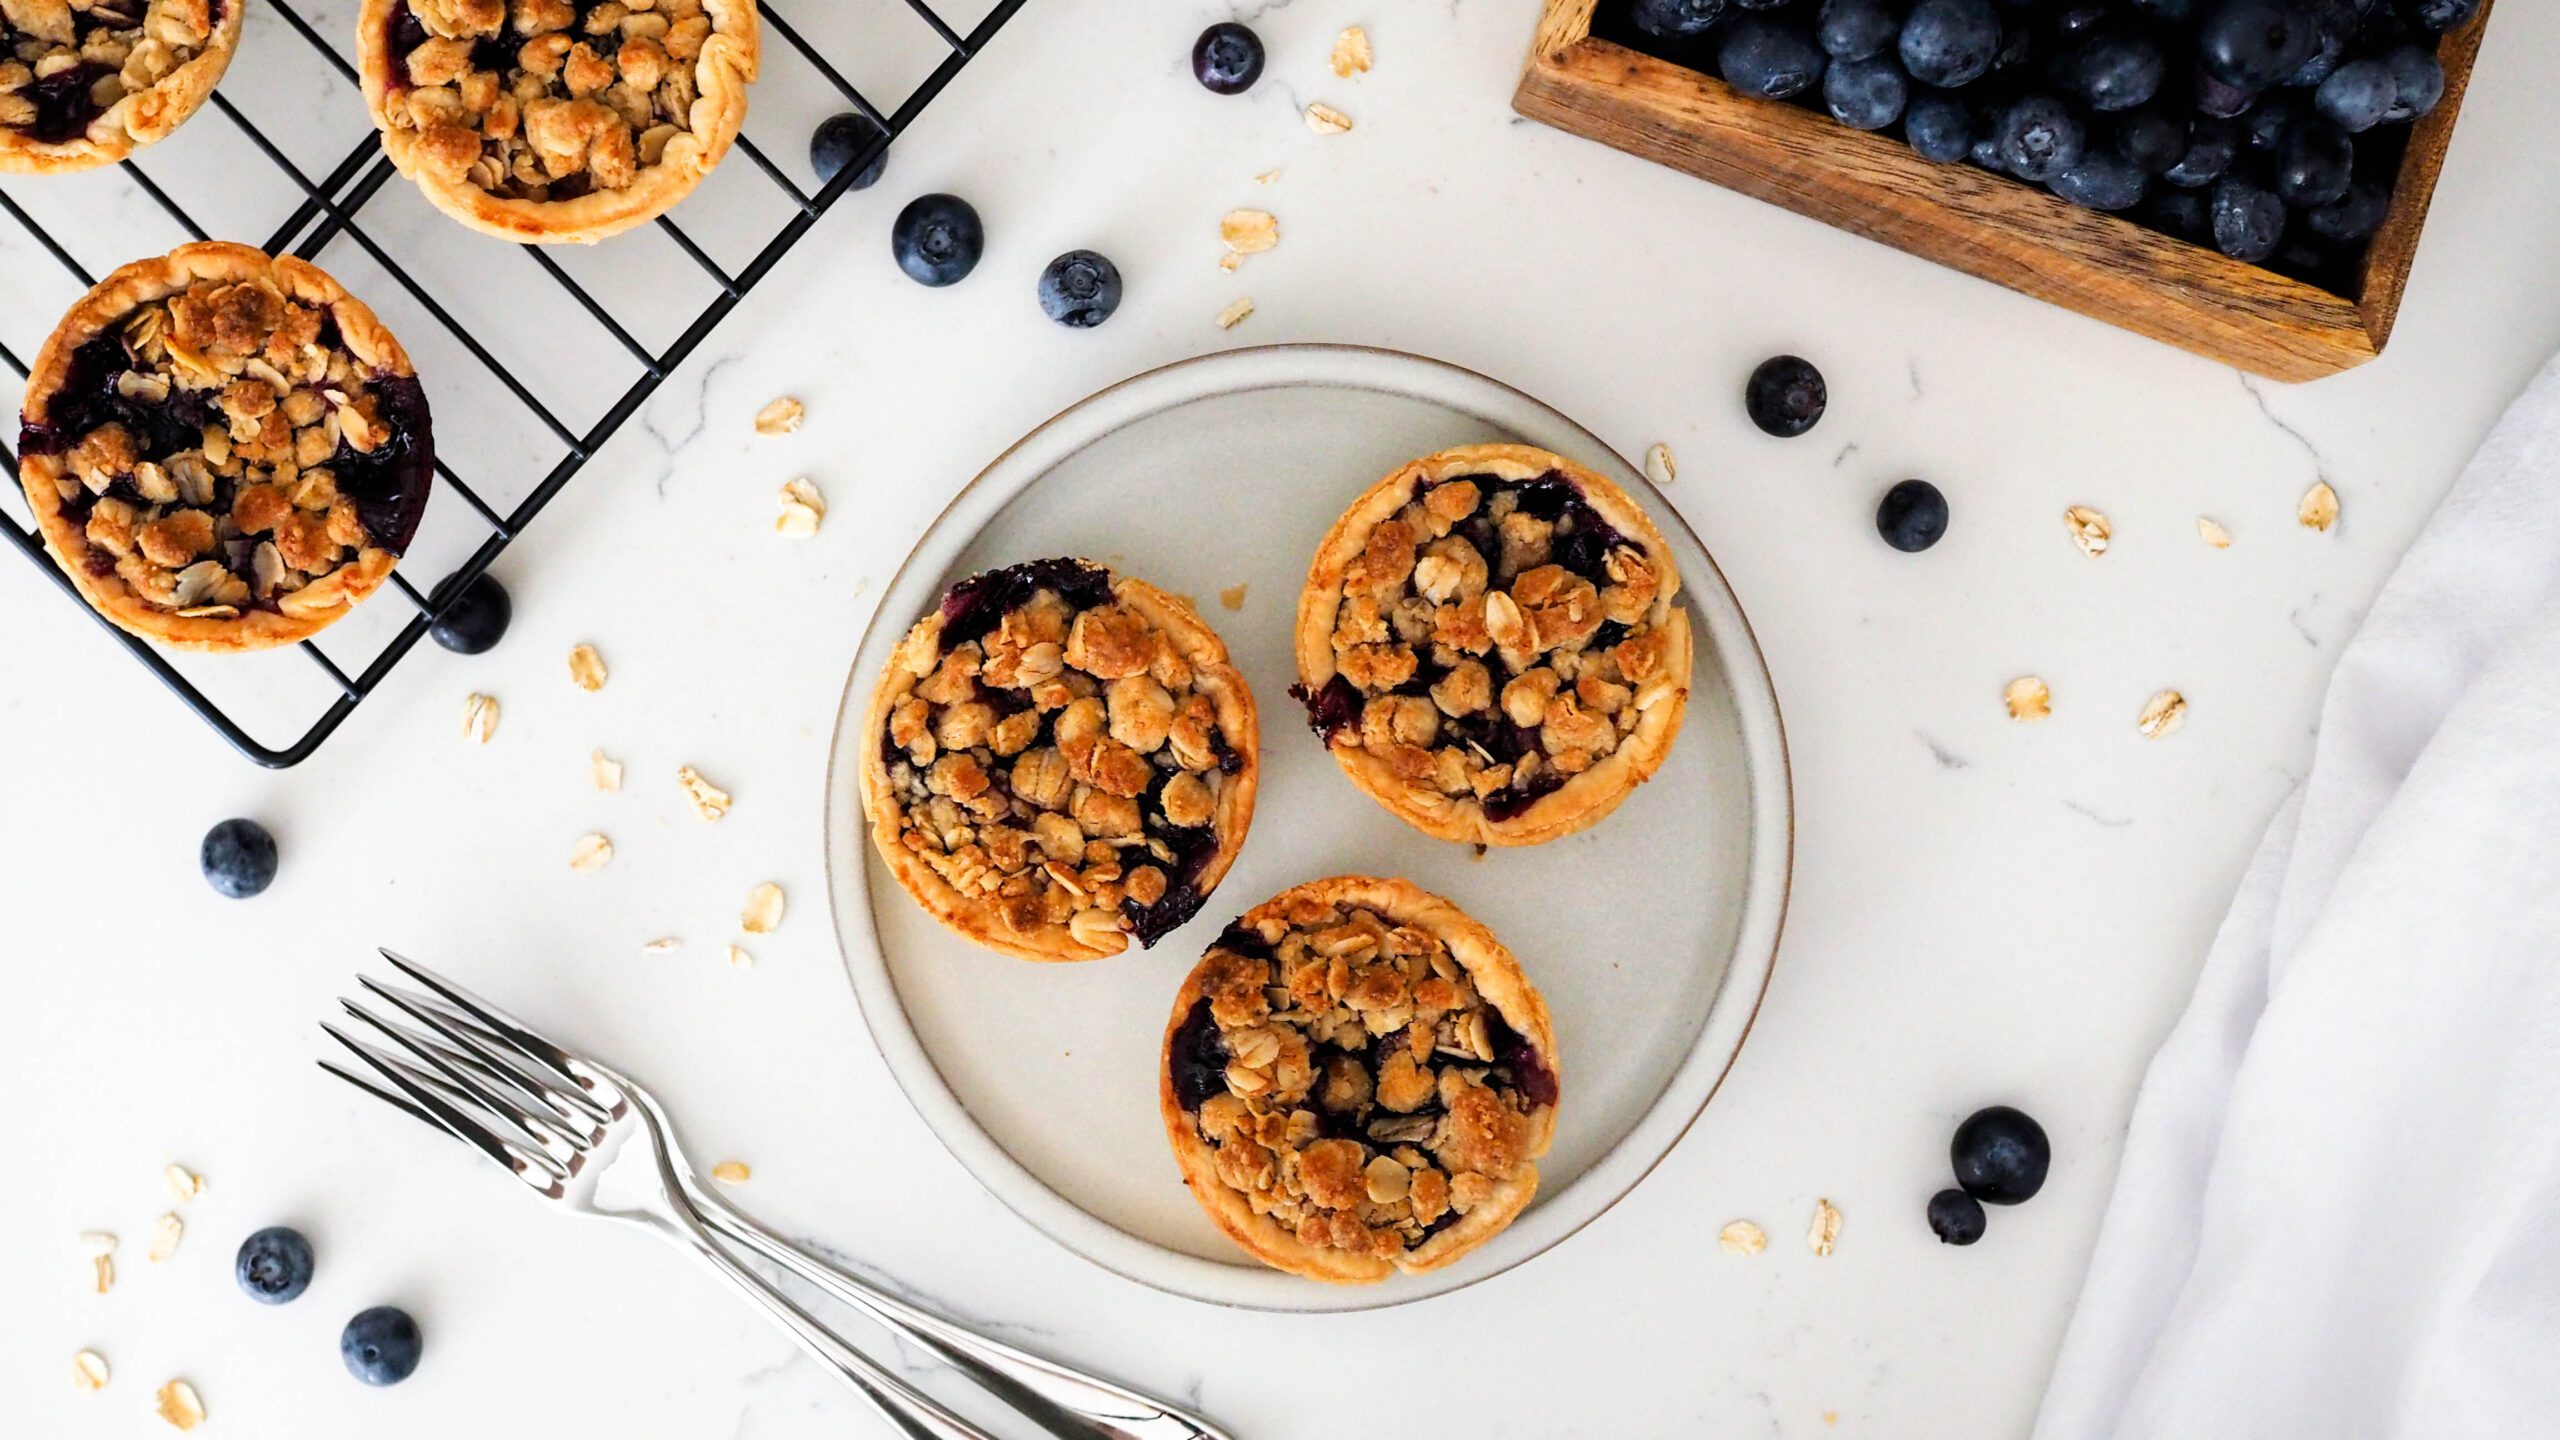 An overhead view of three mini blueberry pies on a small plate with blueberries and oats nearby.